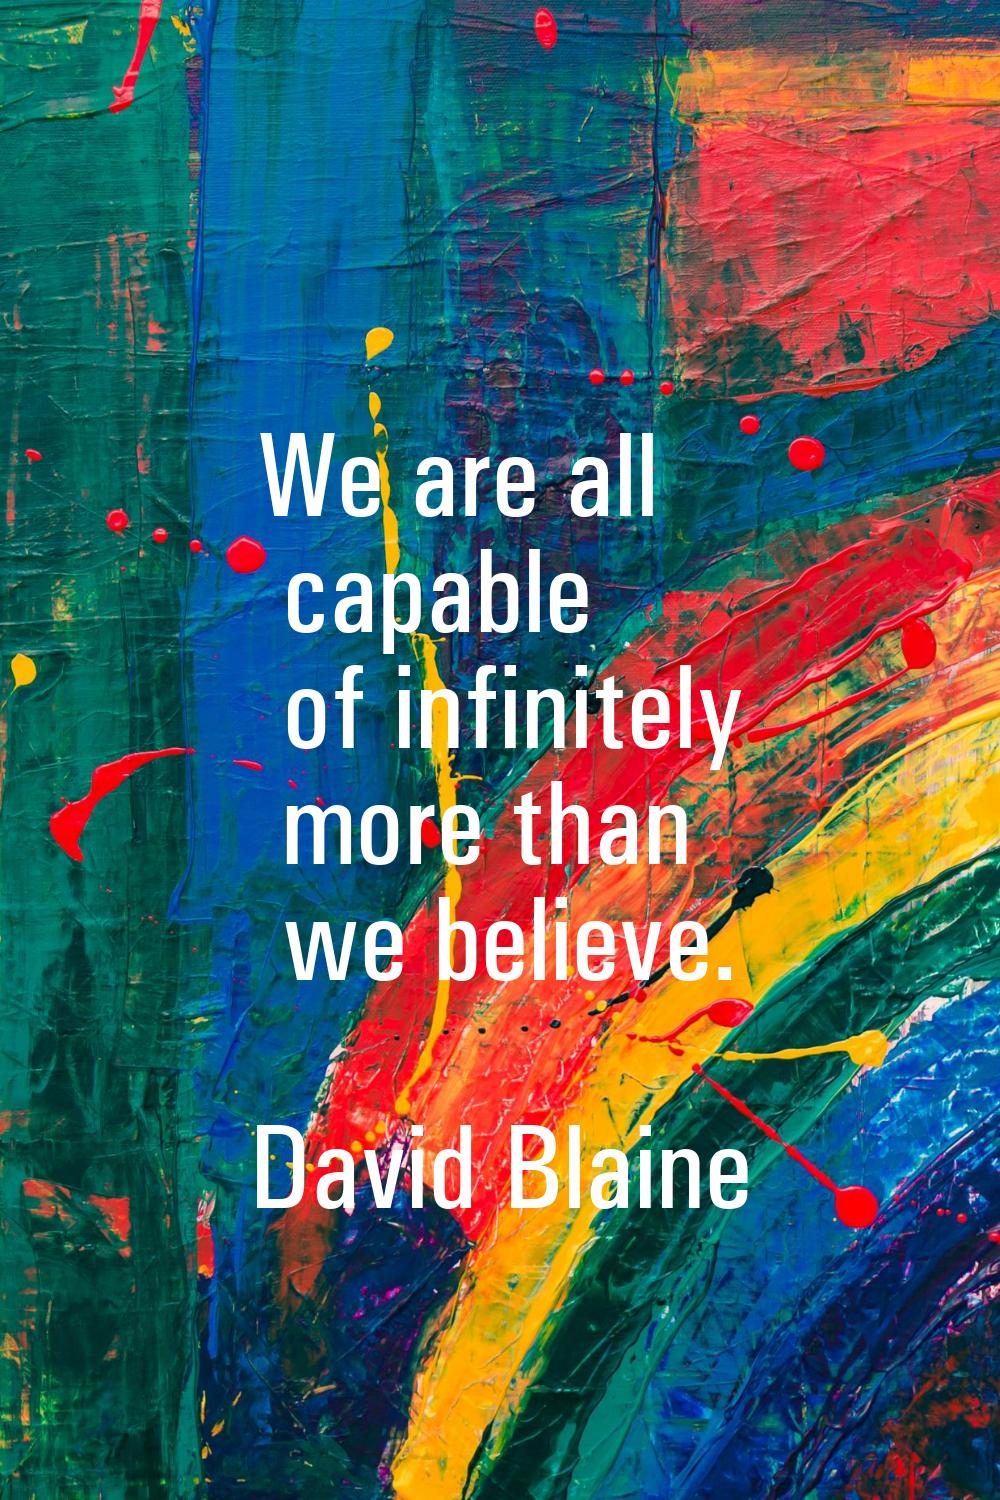 We are all capable of infinitely more than we believe.